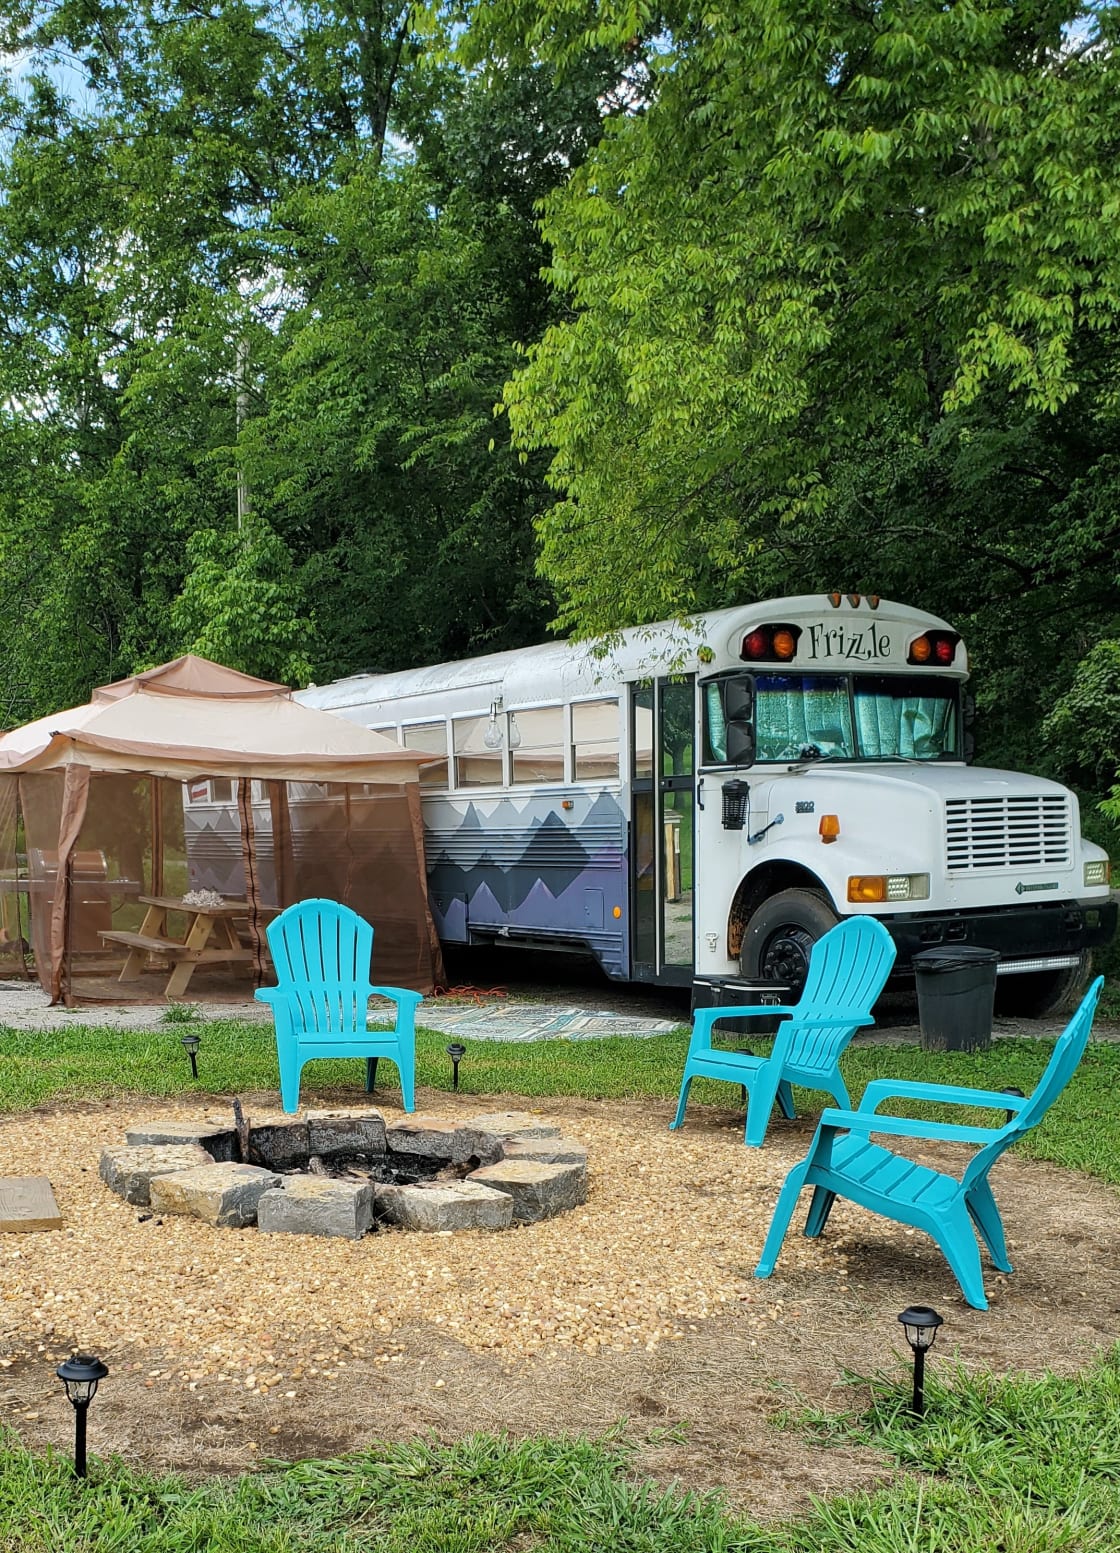 Fire pit, screened canopy, and Frizzle the School bus - waiting for you! 